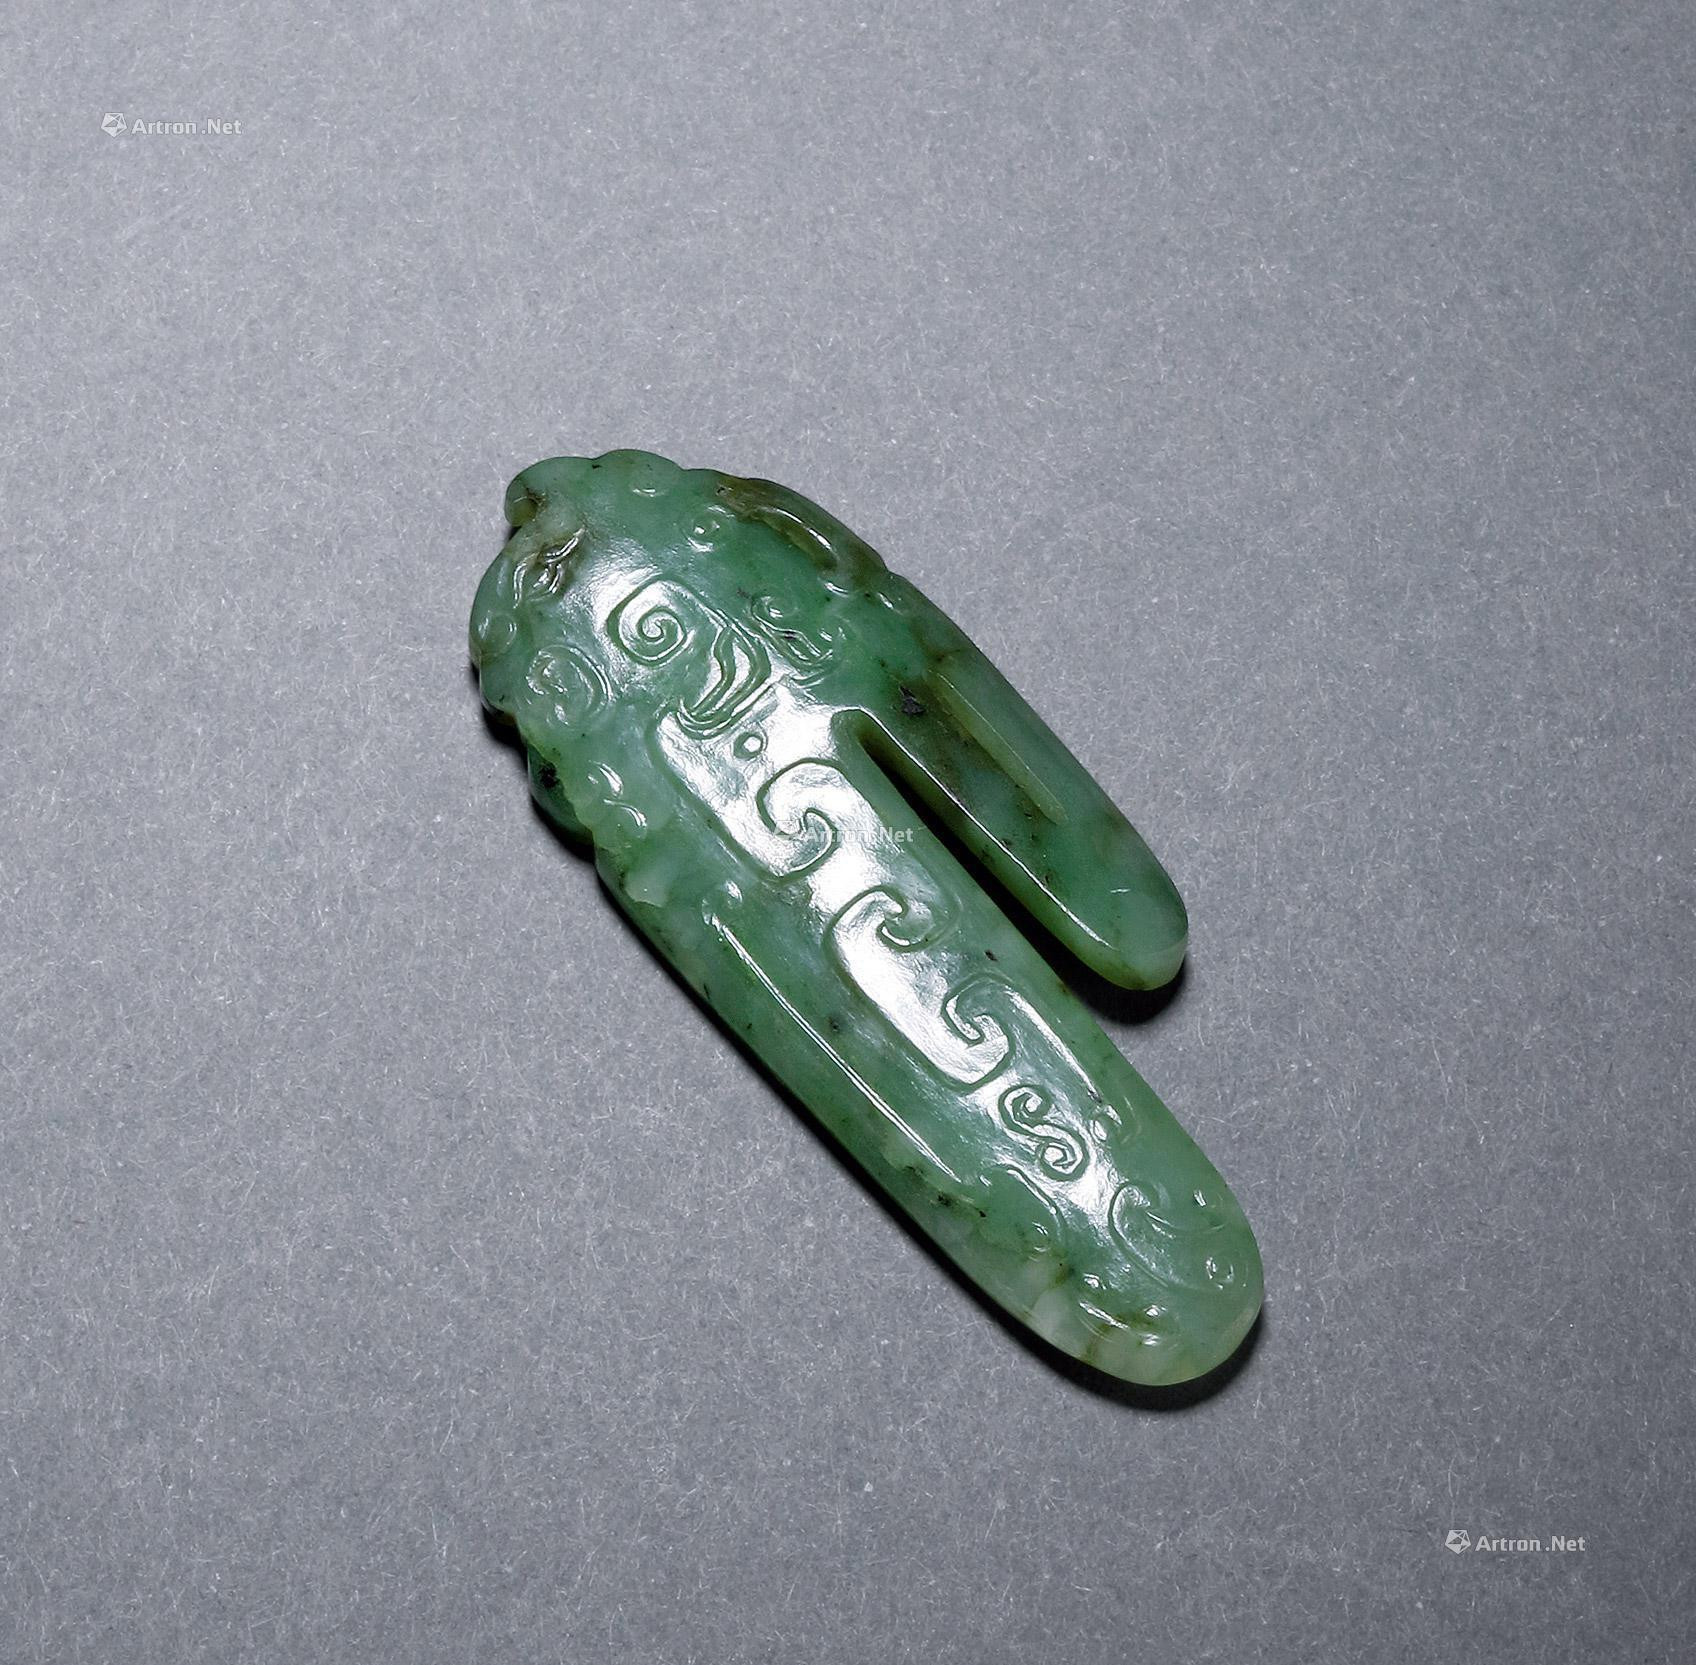 A CARVED greenish white jade OLD-STYLE BUCKLE